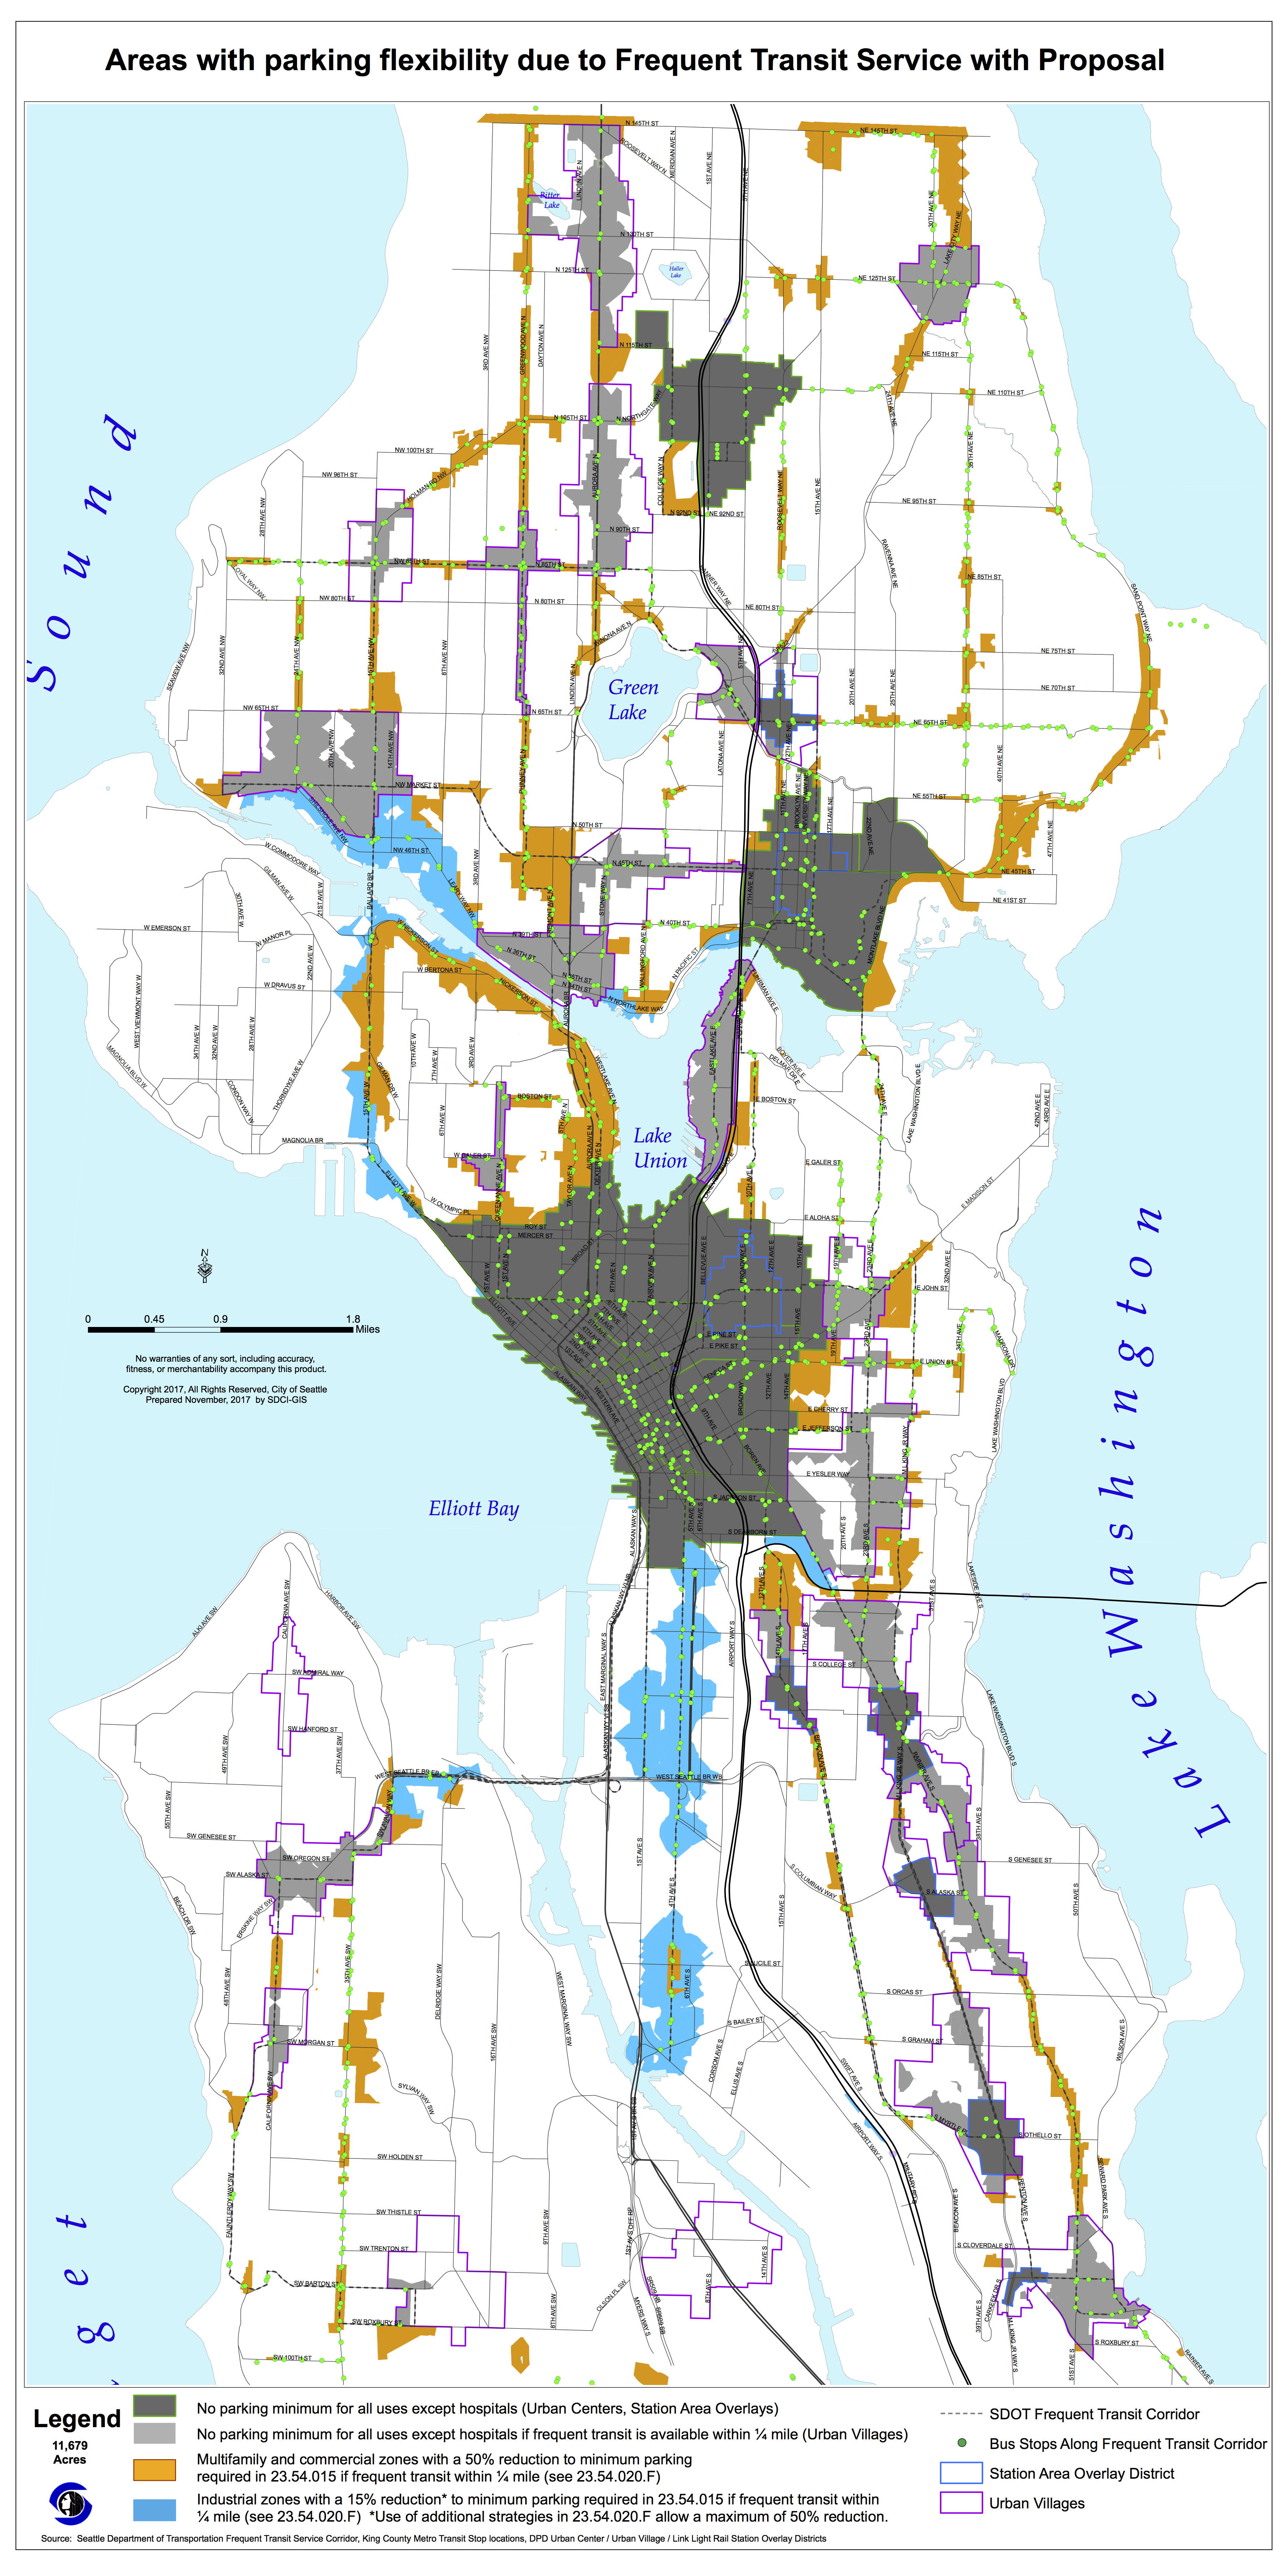 Areas in light grey, orange, and blue may qualify for reduced or eliminated parking requirements due to frequent transit service under the proposal. (City of Seattle)